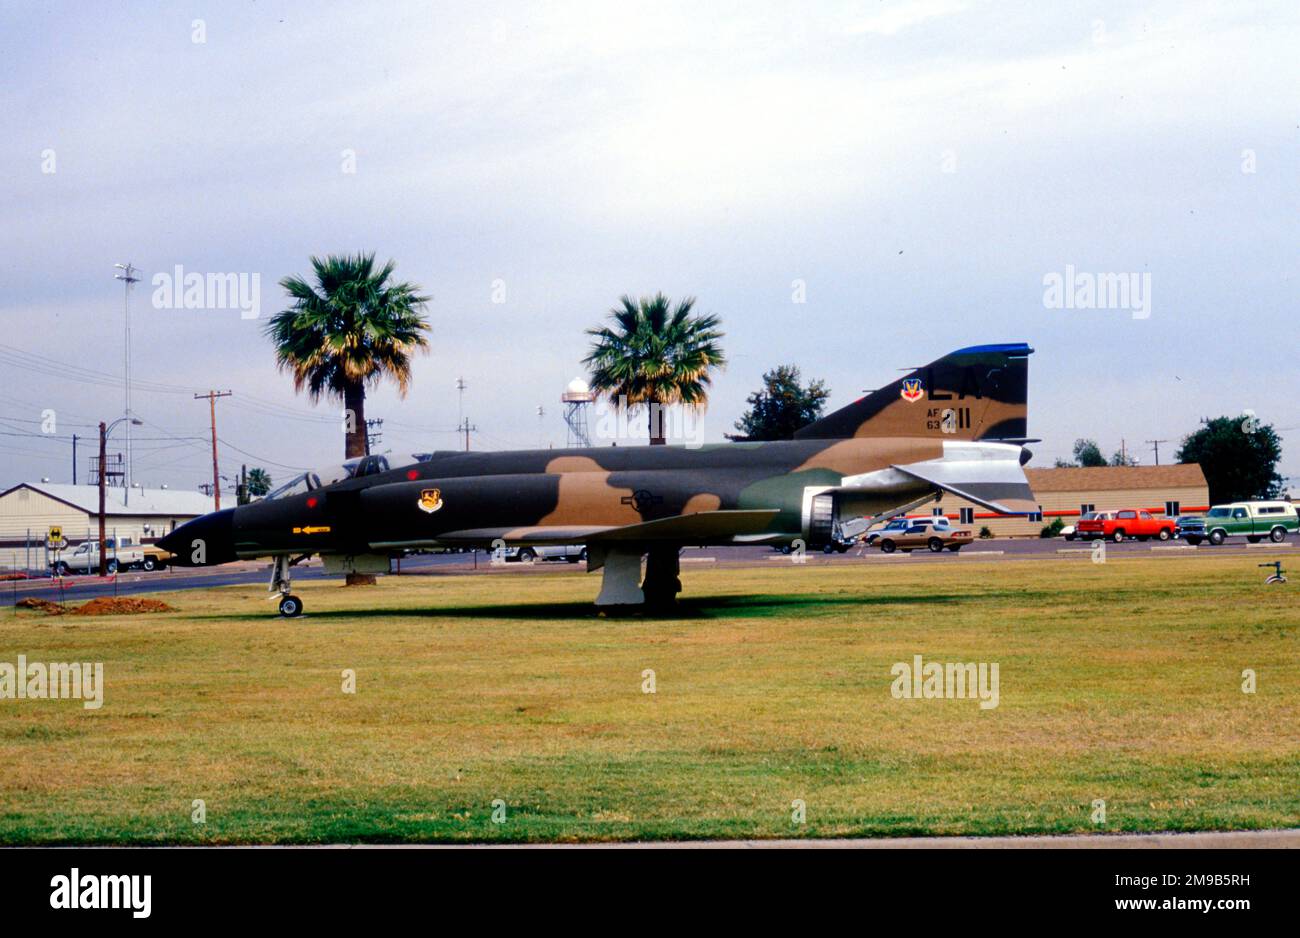 United States Air Force (USAF) - McDonnell RF-4C Phantom marked as '63-0411', on display at Luke Air Force Base (63-0411 crashed on 25 Apr 1967, killing both crew). Stock Photo